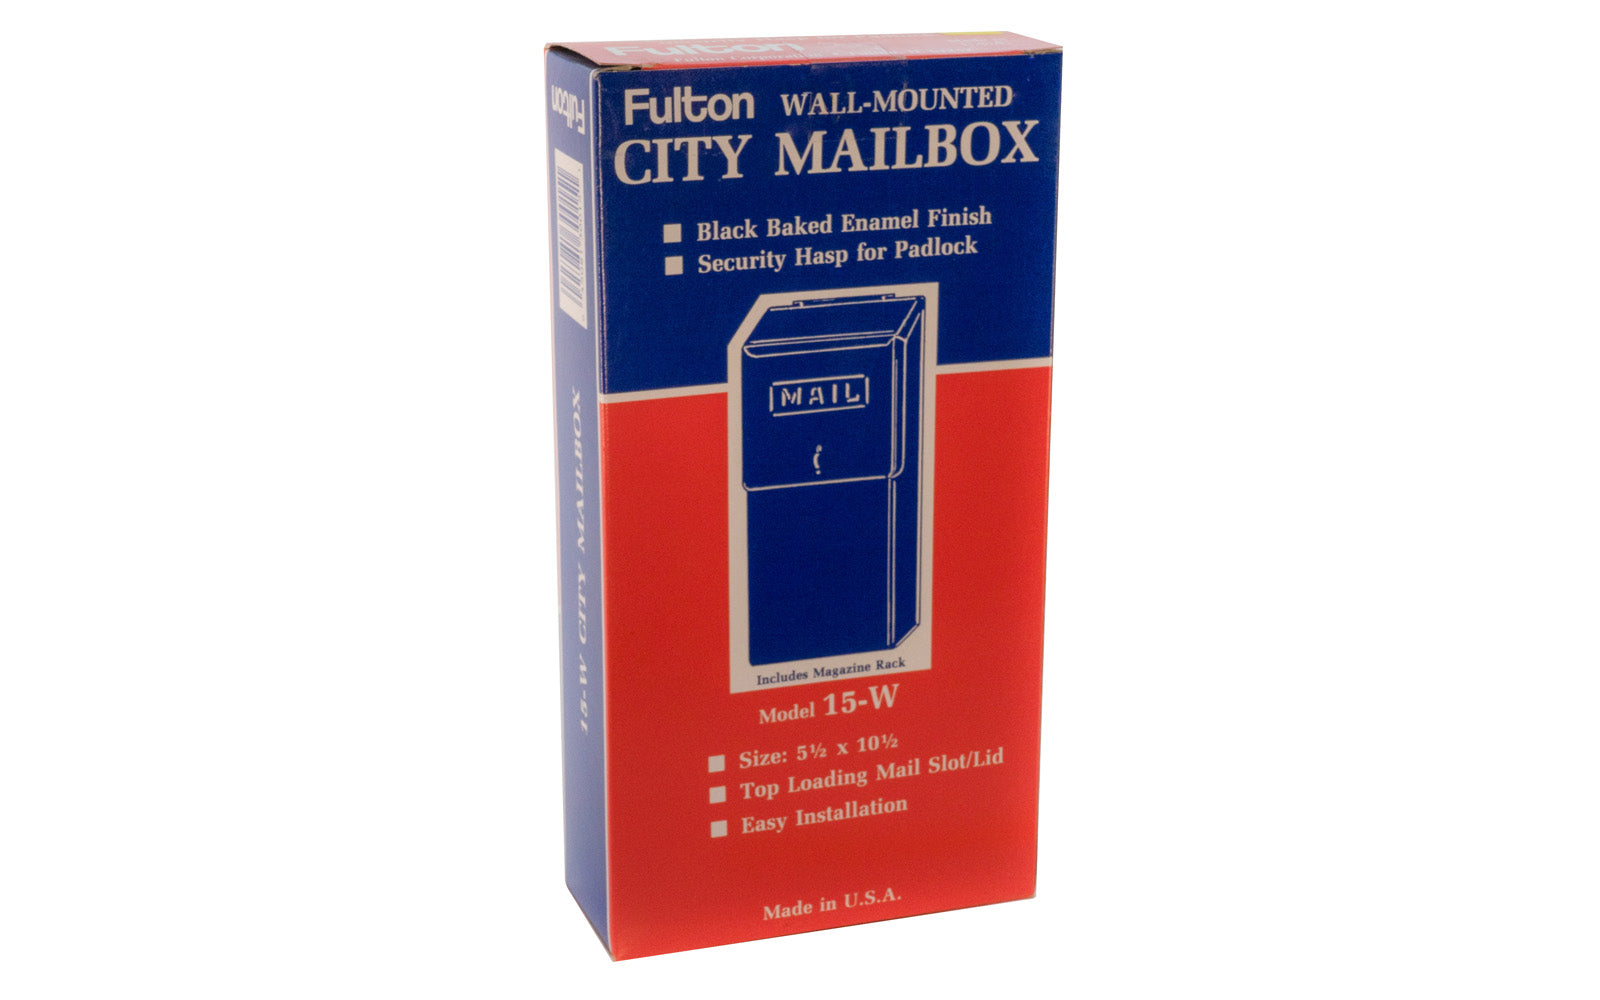 Fulton Wall Mounted Vertical Mailbox - Model 15-W.  Top loading mail slot / lid. 5-1/2